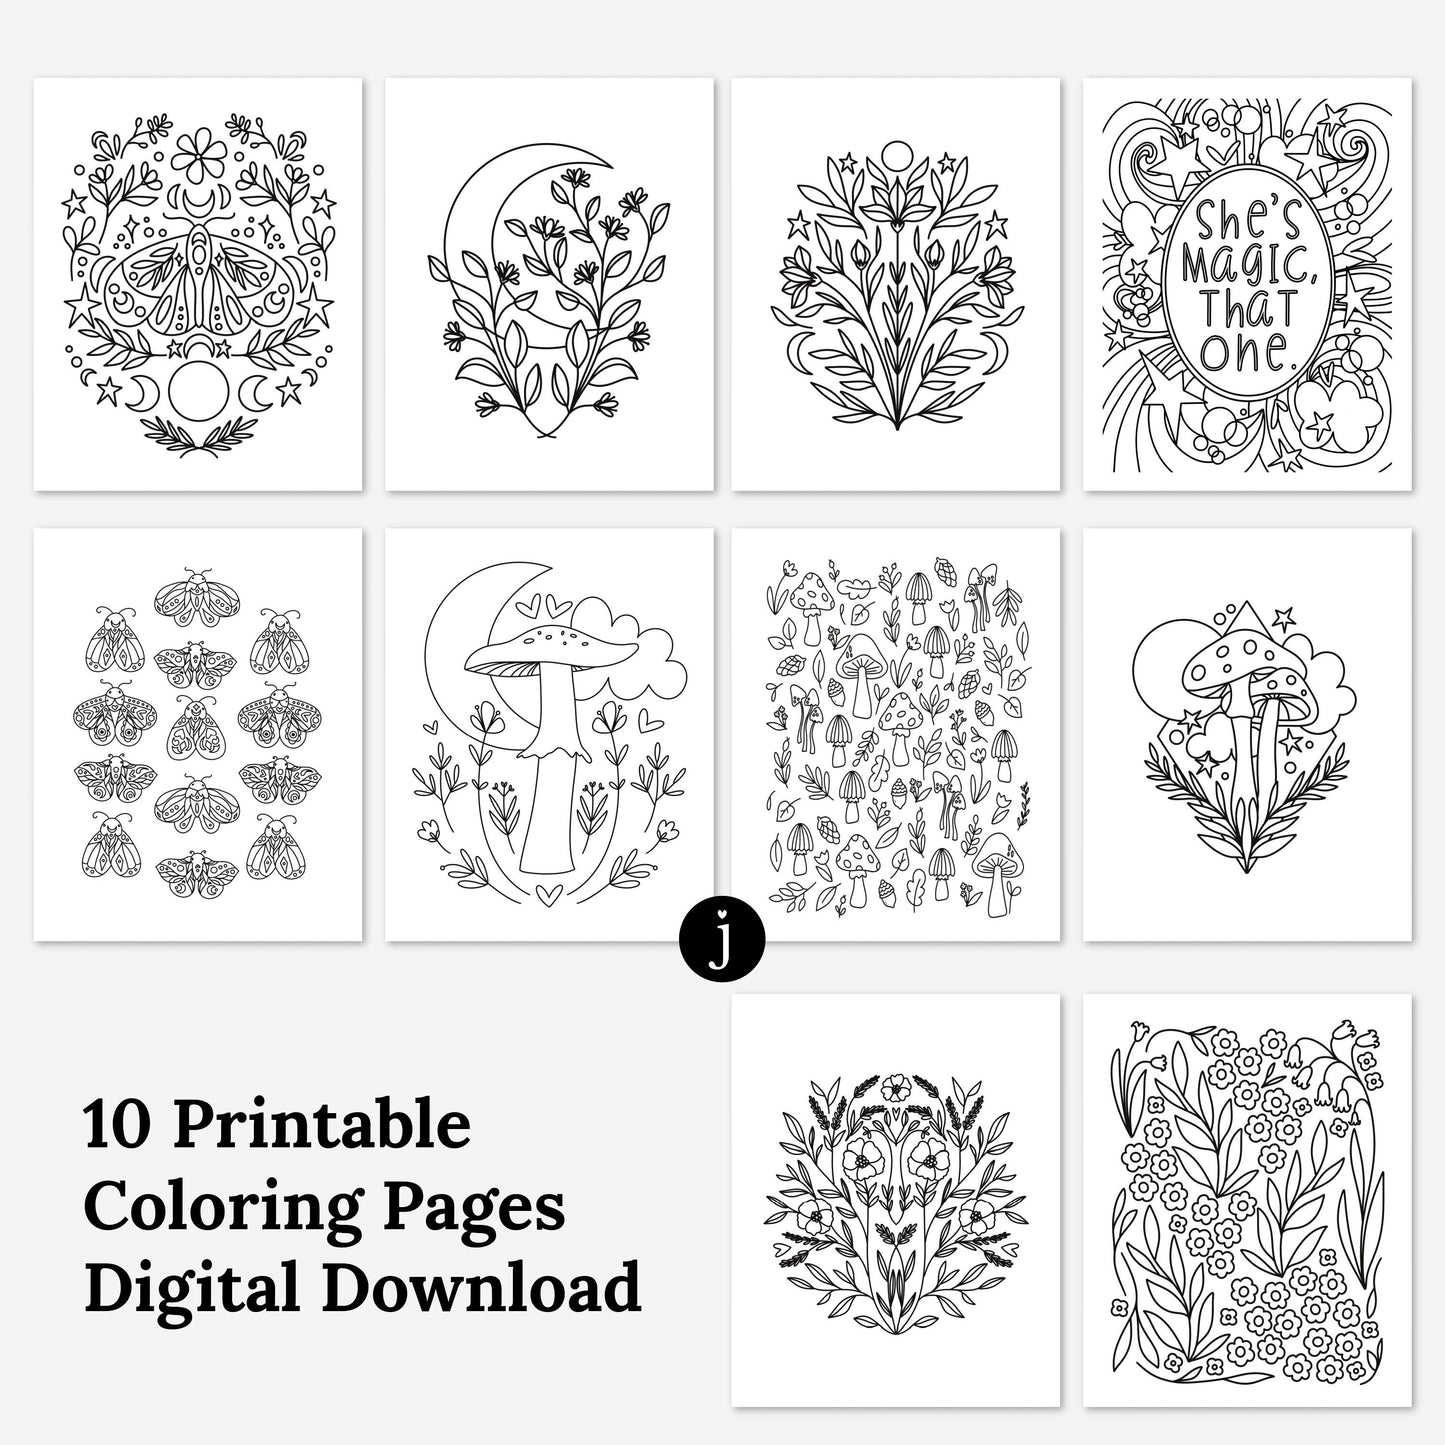 10 Pk Magical Printable Coloring Book 10Pk Coloring Pages | Hand-Drawn Moon Mushroom Floral | Adult Zen Calming Color Activity Time